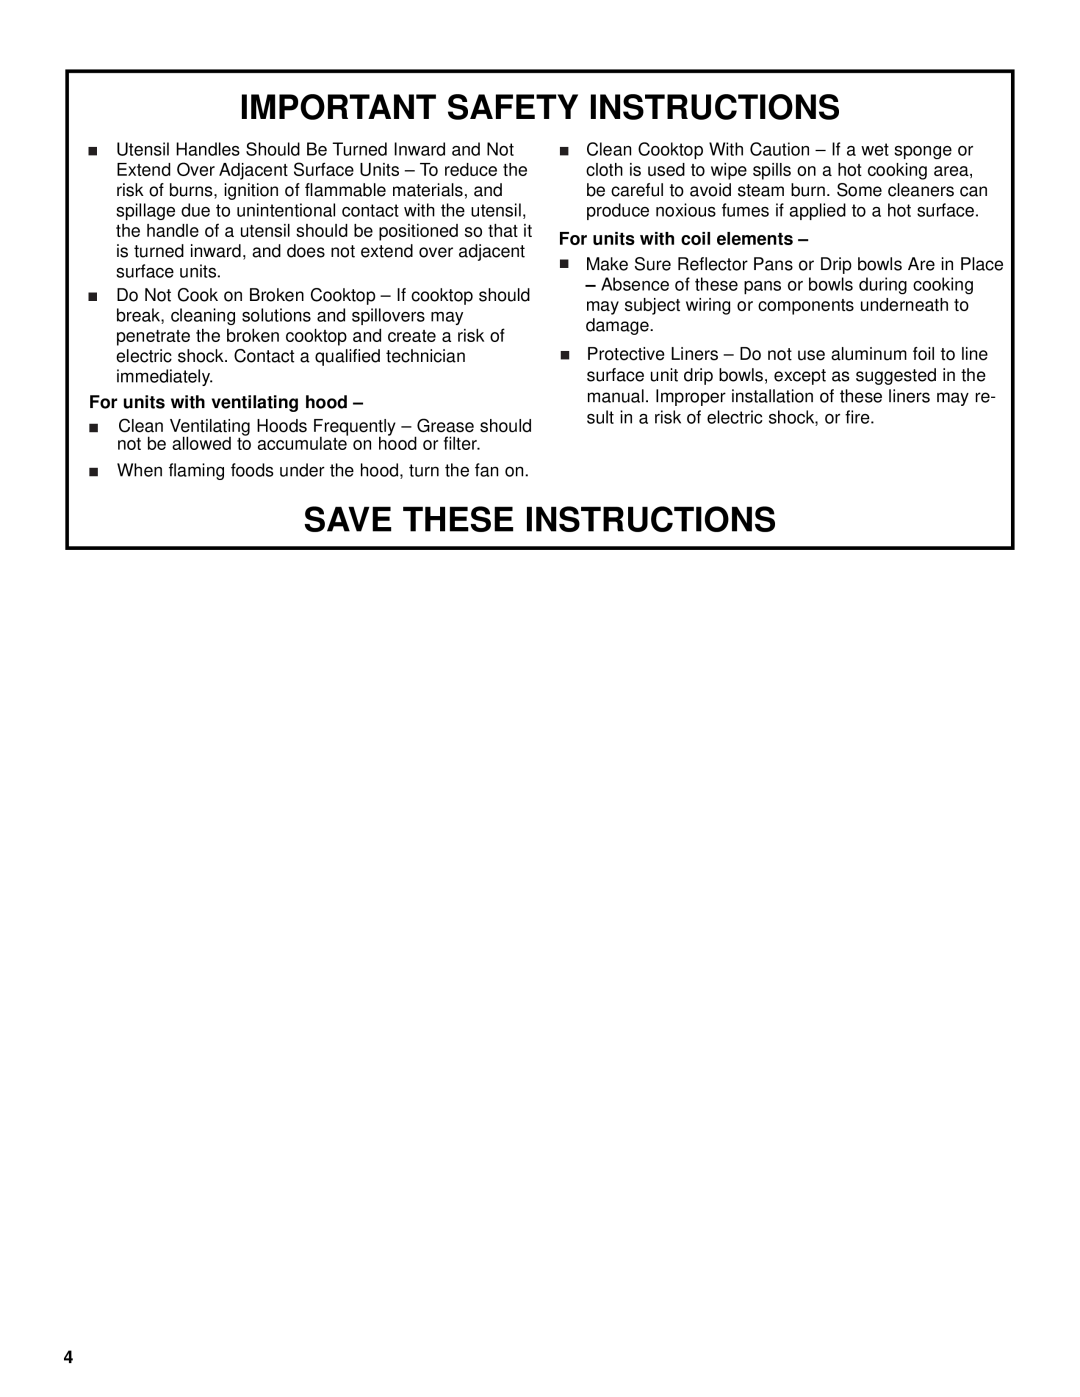 Whirlpool RCS2002 manual For units with ventilating hood, For units with coil elements, Important Safety Instructions 